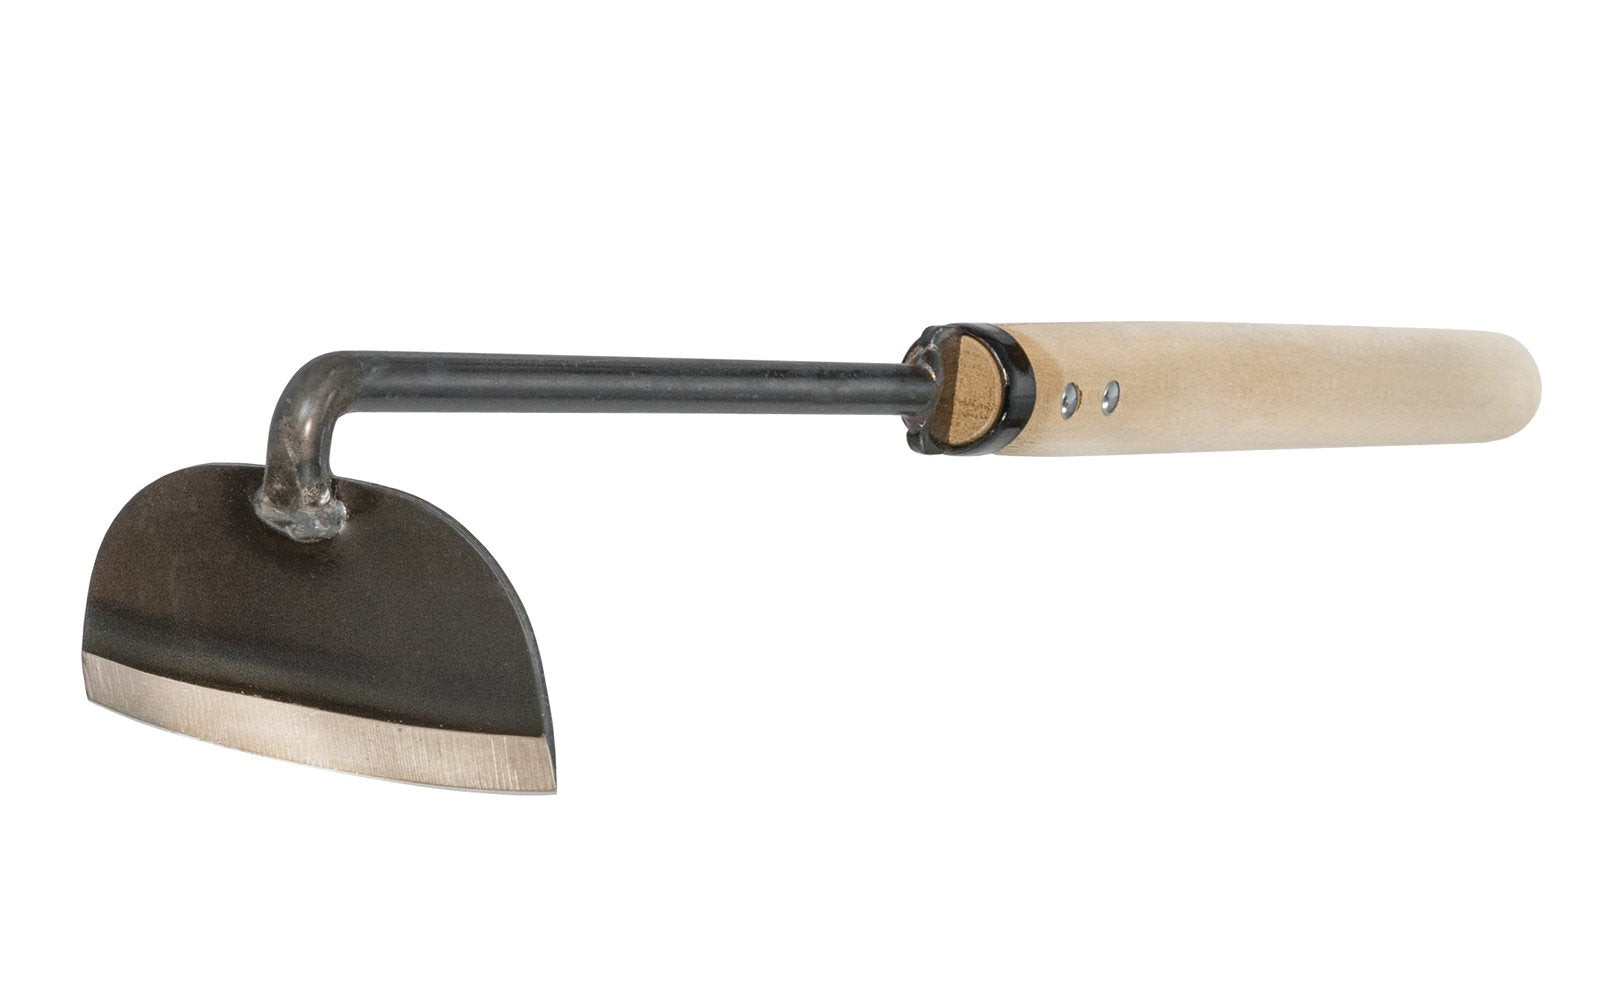 Made in Japan - Japanese sharp weeder with a long neck ~ high carbon steel ~ Cutting blade - Cultivator ~ Hoe - Scythe - Blade in center - 3" long blade - Japanese Garden Mini Weeder - Cutting Grass - Weeding - Roots - Kusakichi Scraper - Half Round Blade - Laminated to soft steel - 3" long blade - 75 mm - 16" - Tamanegi Weeder - For Seedlings - 4994898020119